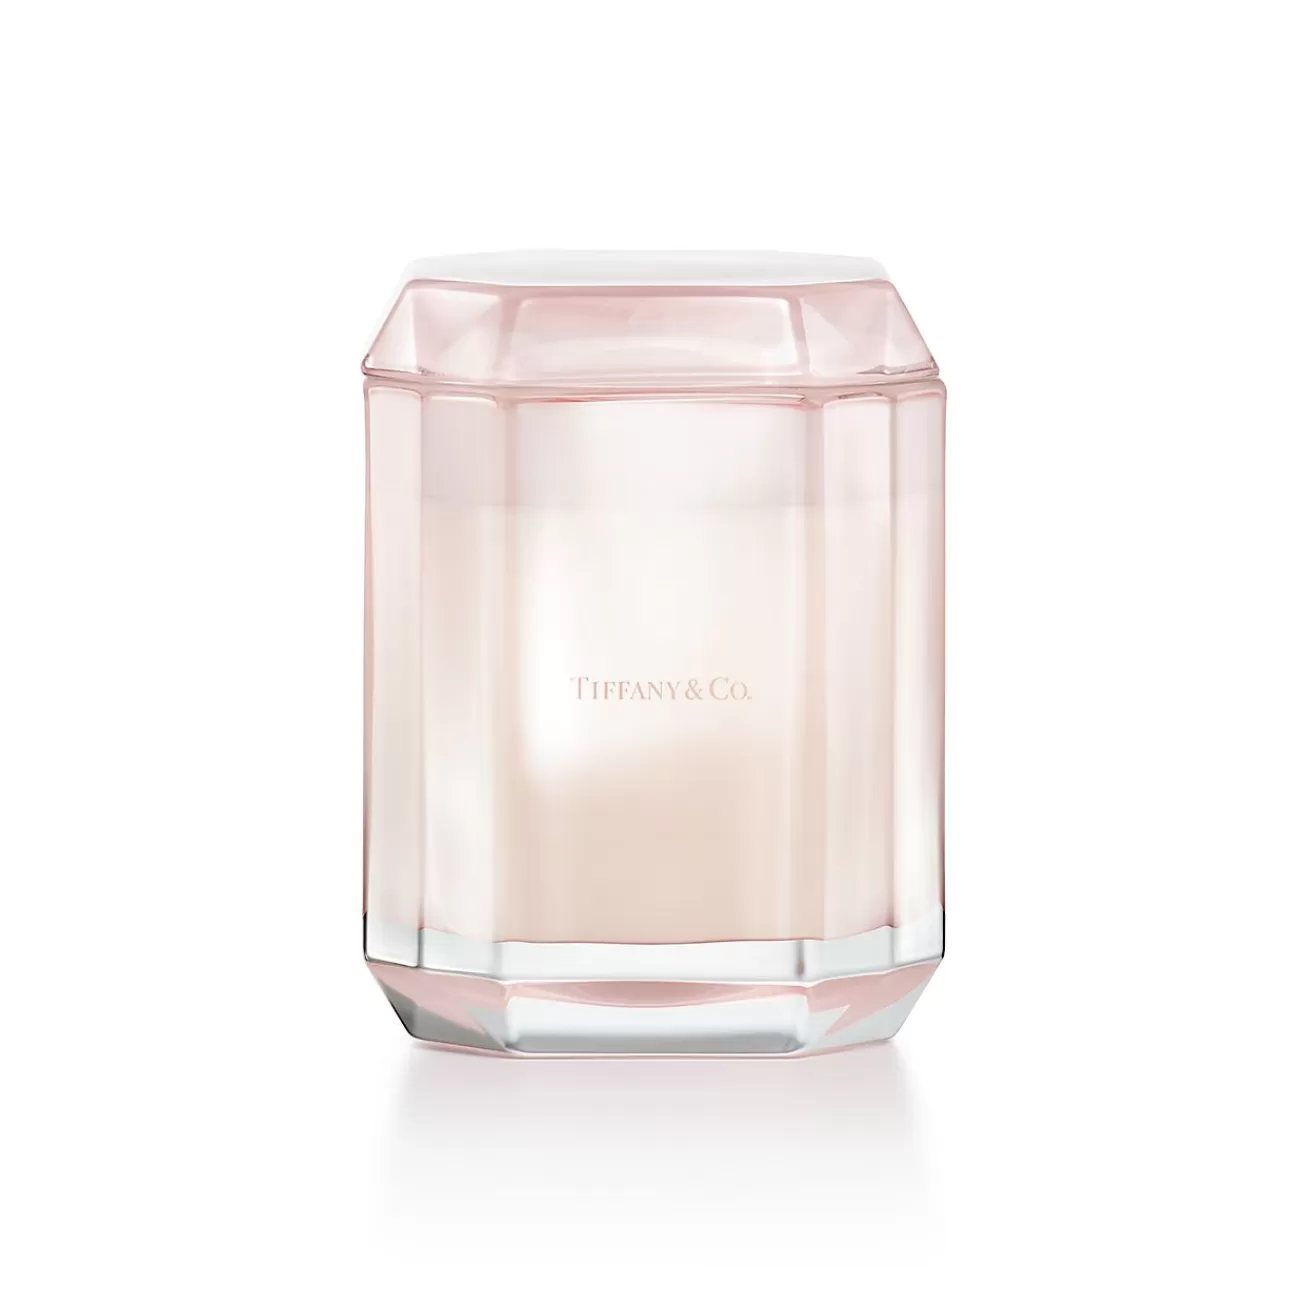 Tiffany & Co. Tiffany Facets 57th & Fifth Candle in Morganite-colored Glass | ^ The Home | Housewarming Gifts